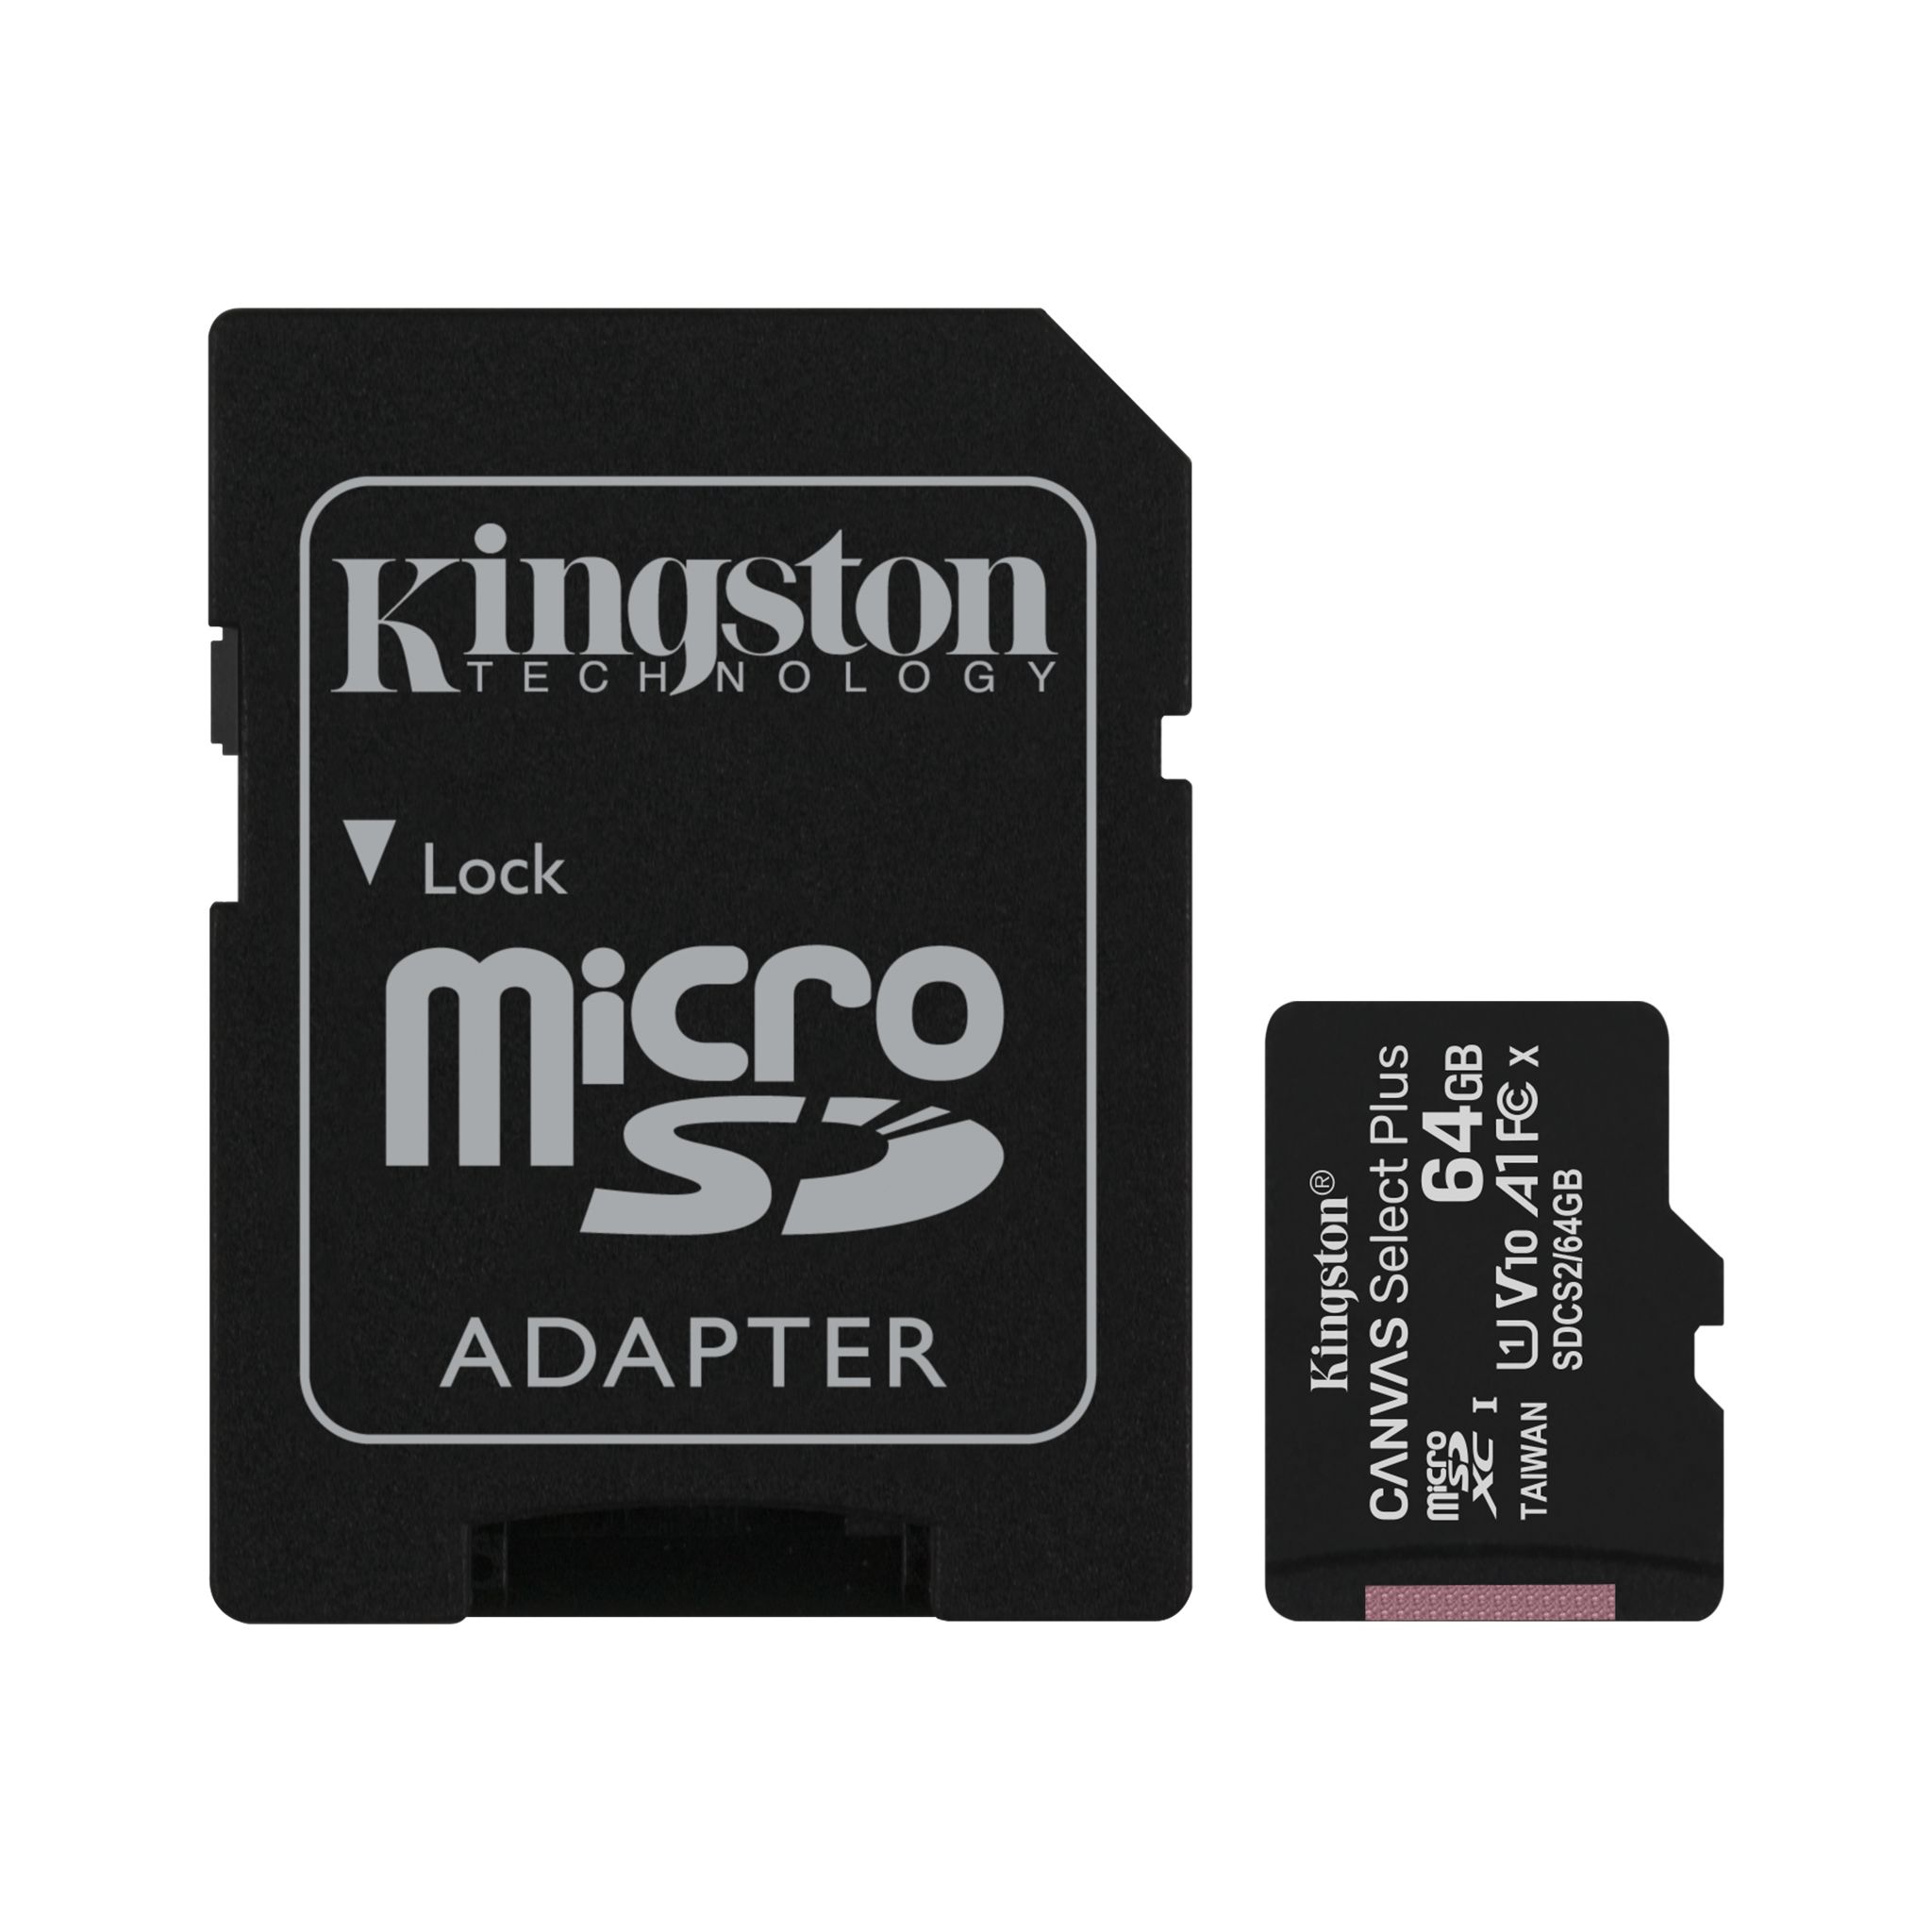 Kingston 32GB Huawei Honor Note 9 MicroSDHC Canvas Select Plus Card Verified by SanFlash. 100MBs Works with Kingston